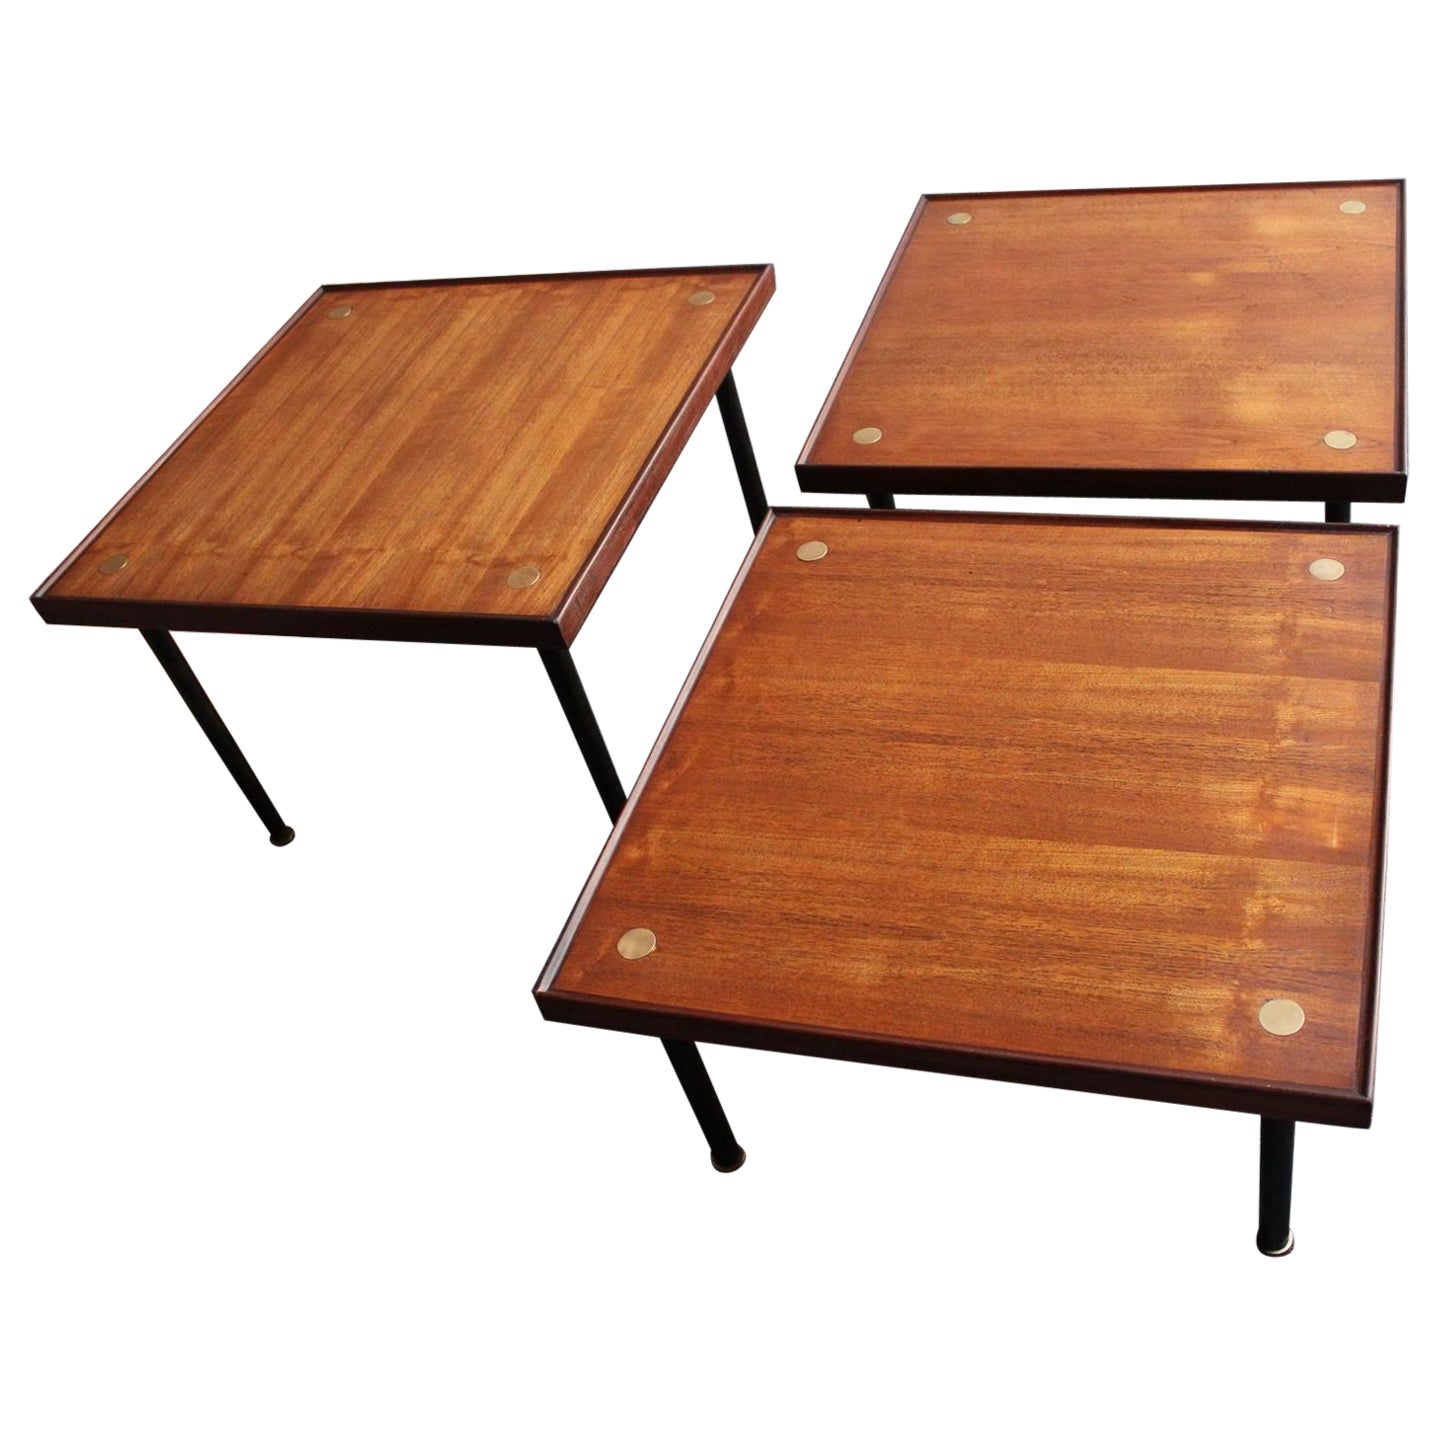 Set of Three Rosewood "Konvival" Tables/Settee by Fabrizio Bruno for Klan Italy